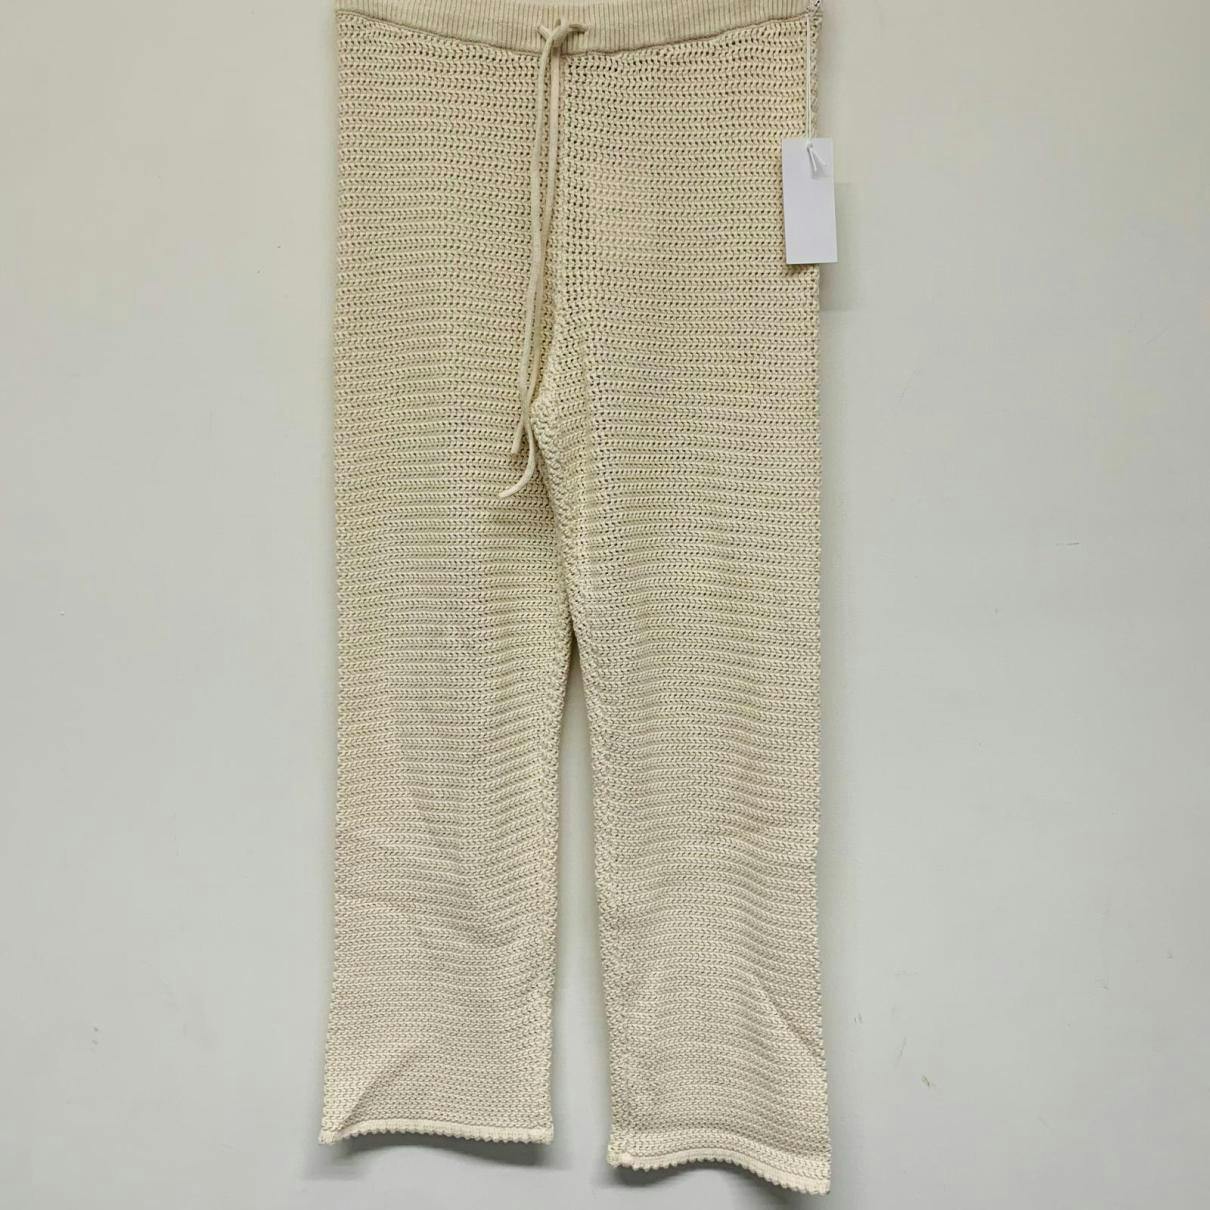 https://images.vestiairecollective.com/cdn-cgi/image/q=75,f=auto,/produit/white-synthetic-reformation-trousers-35136158-11_2.jpg?secret=VC-e9eee96a-a819-4431-ad12-d066be2626ef